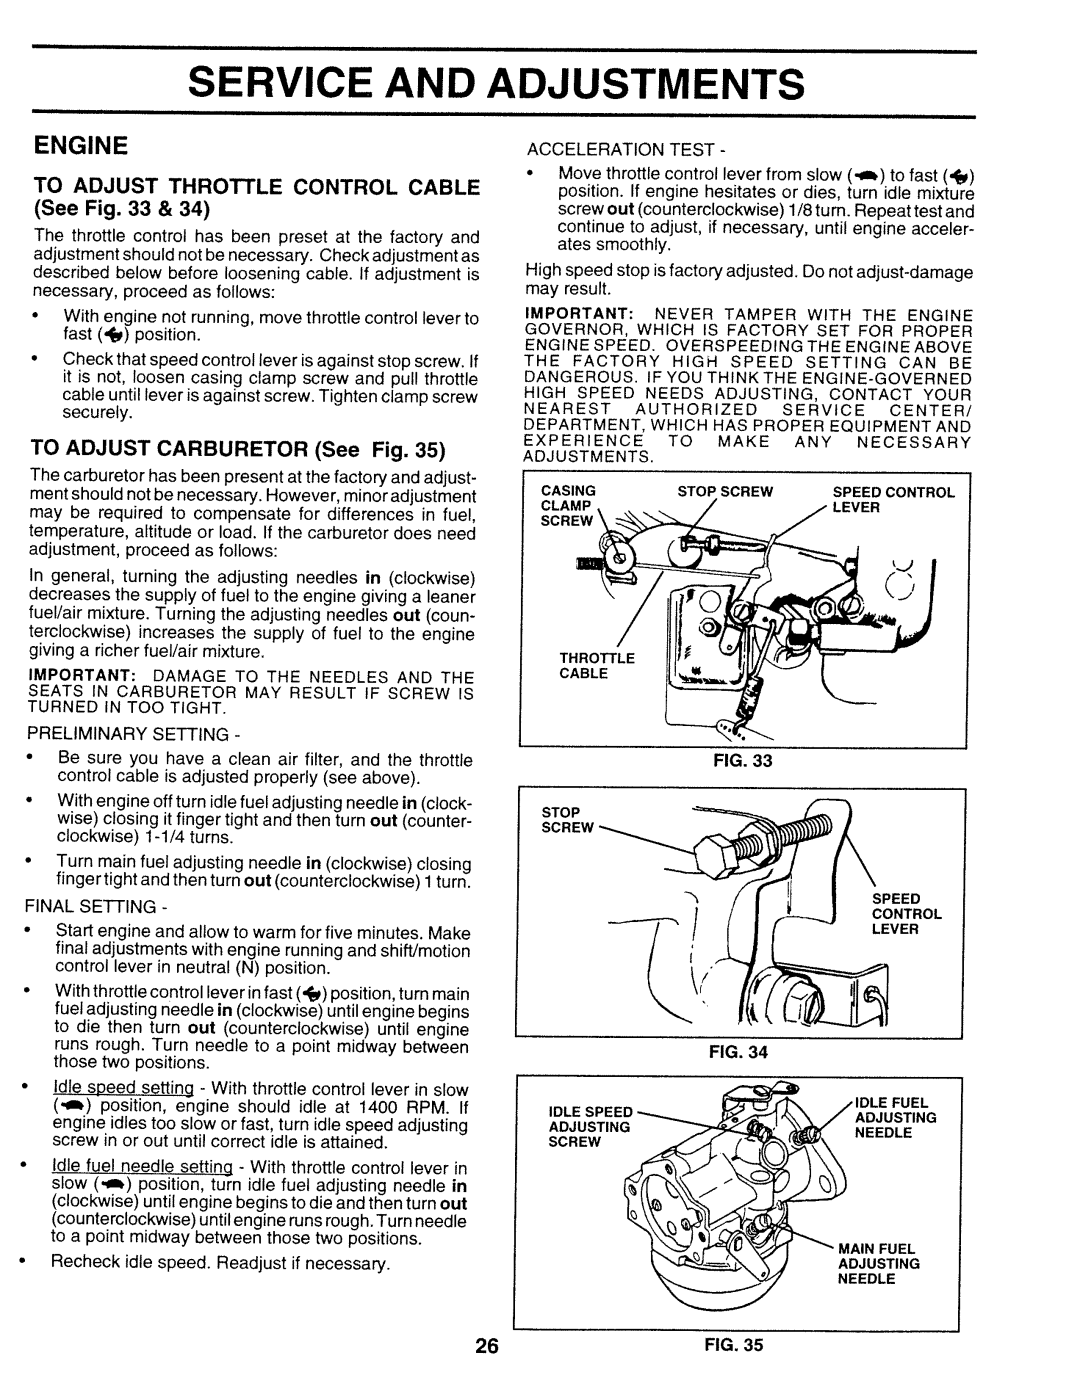 Sears 917.25271 sc. w, Service And, Adjustments, TO ADJUST THROTTLE CONTROL CABLE See, TO ADJUST CARBURETOR See Fig 